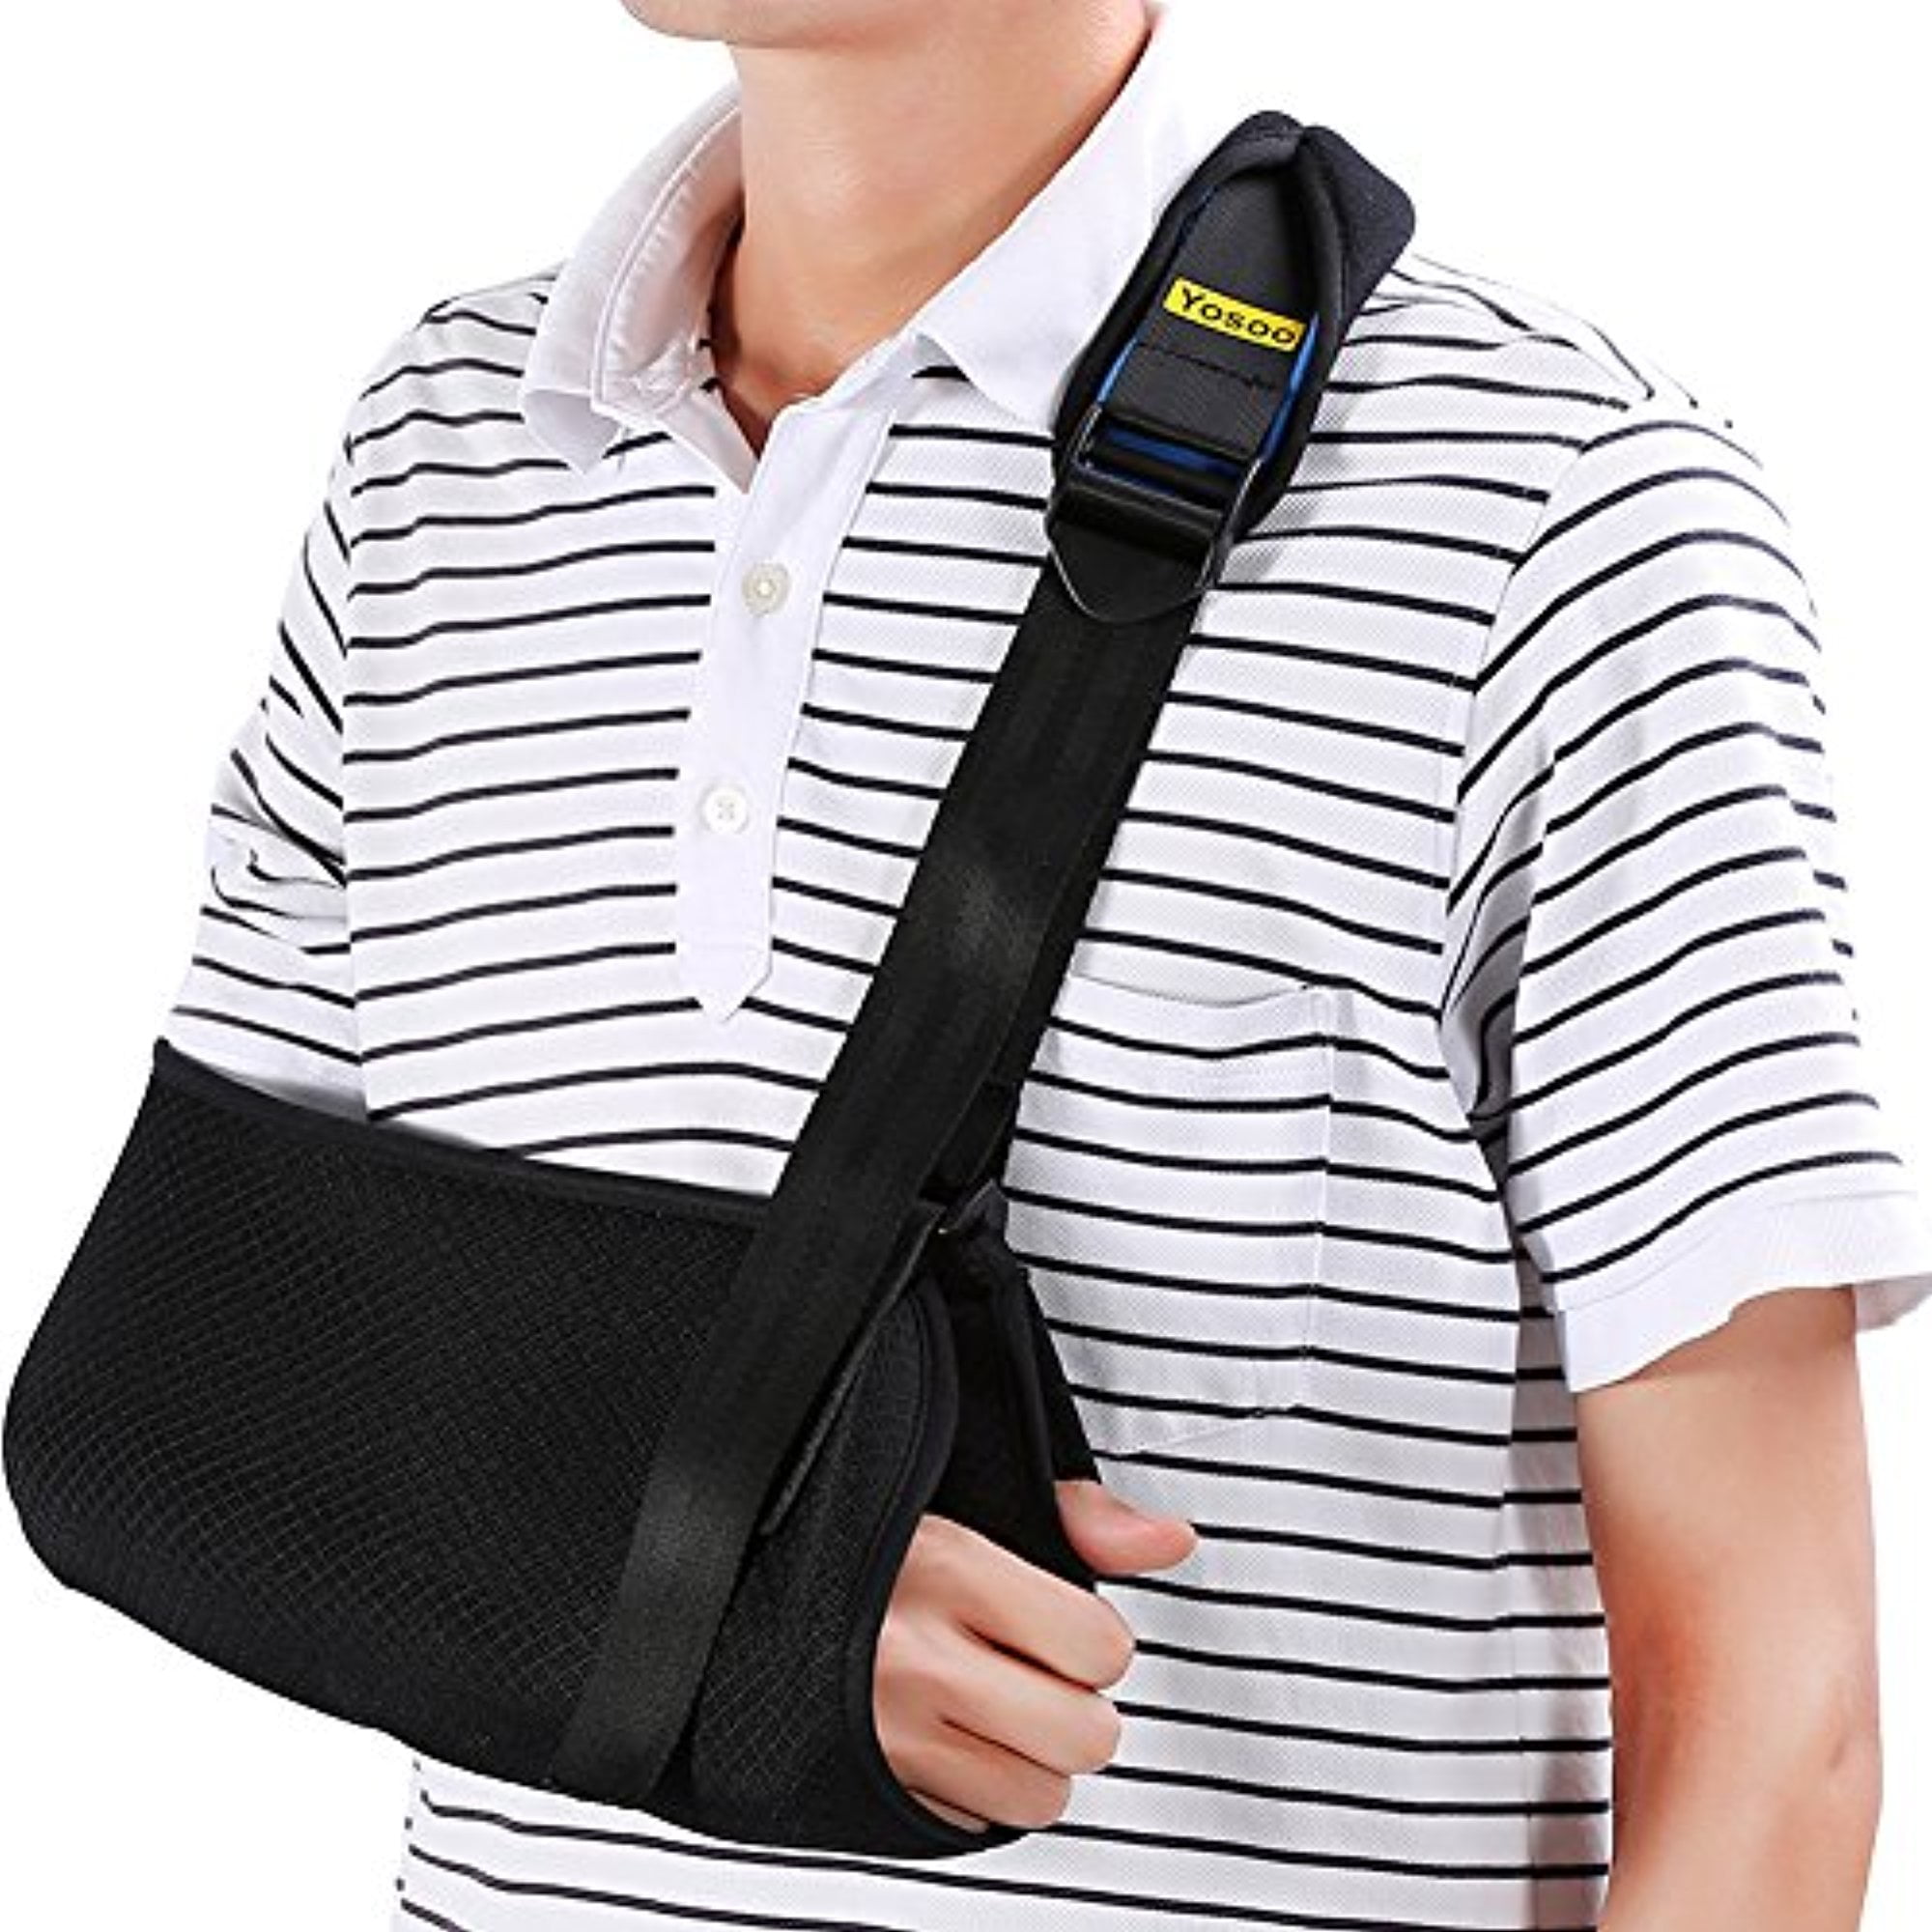 List 101+ Background Images Pictures Of A Sling Updated